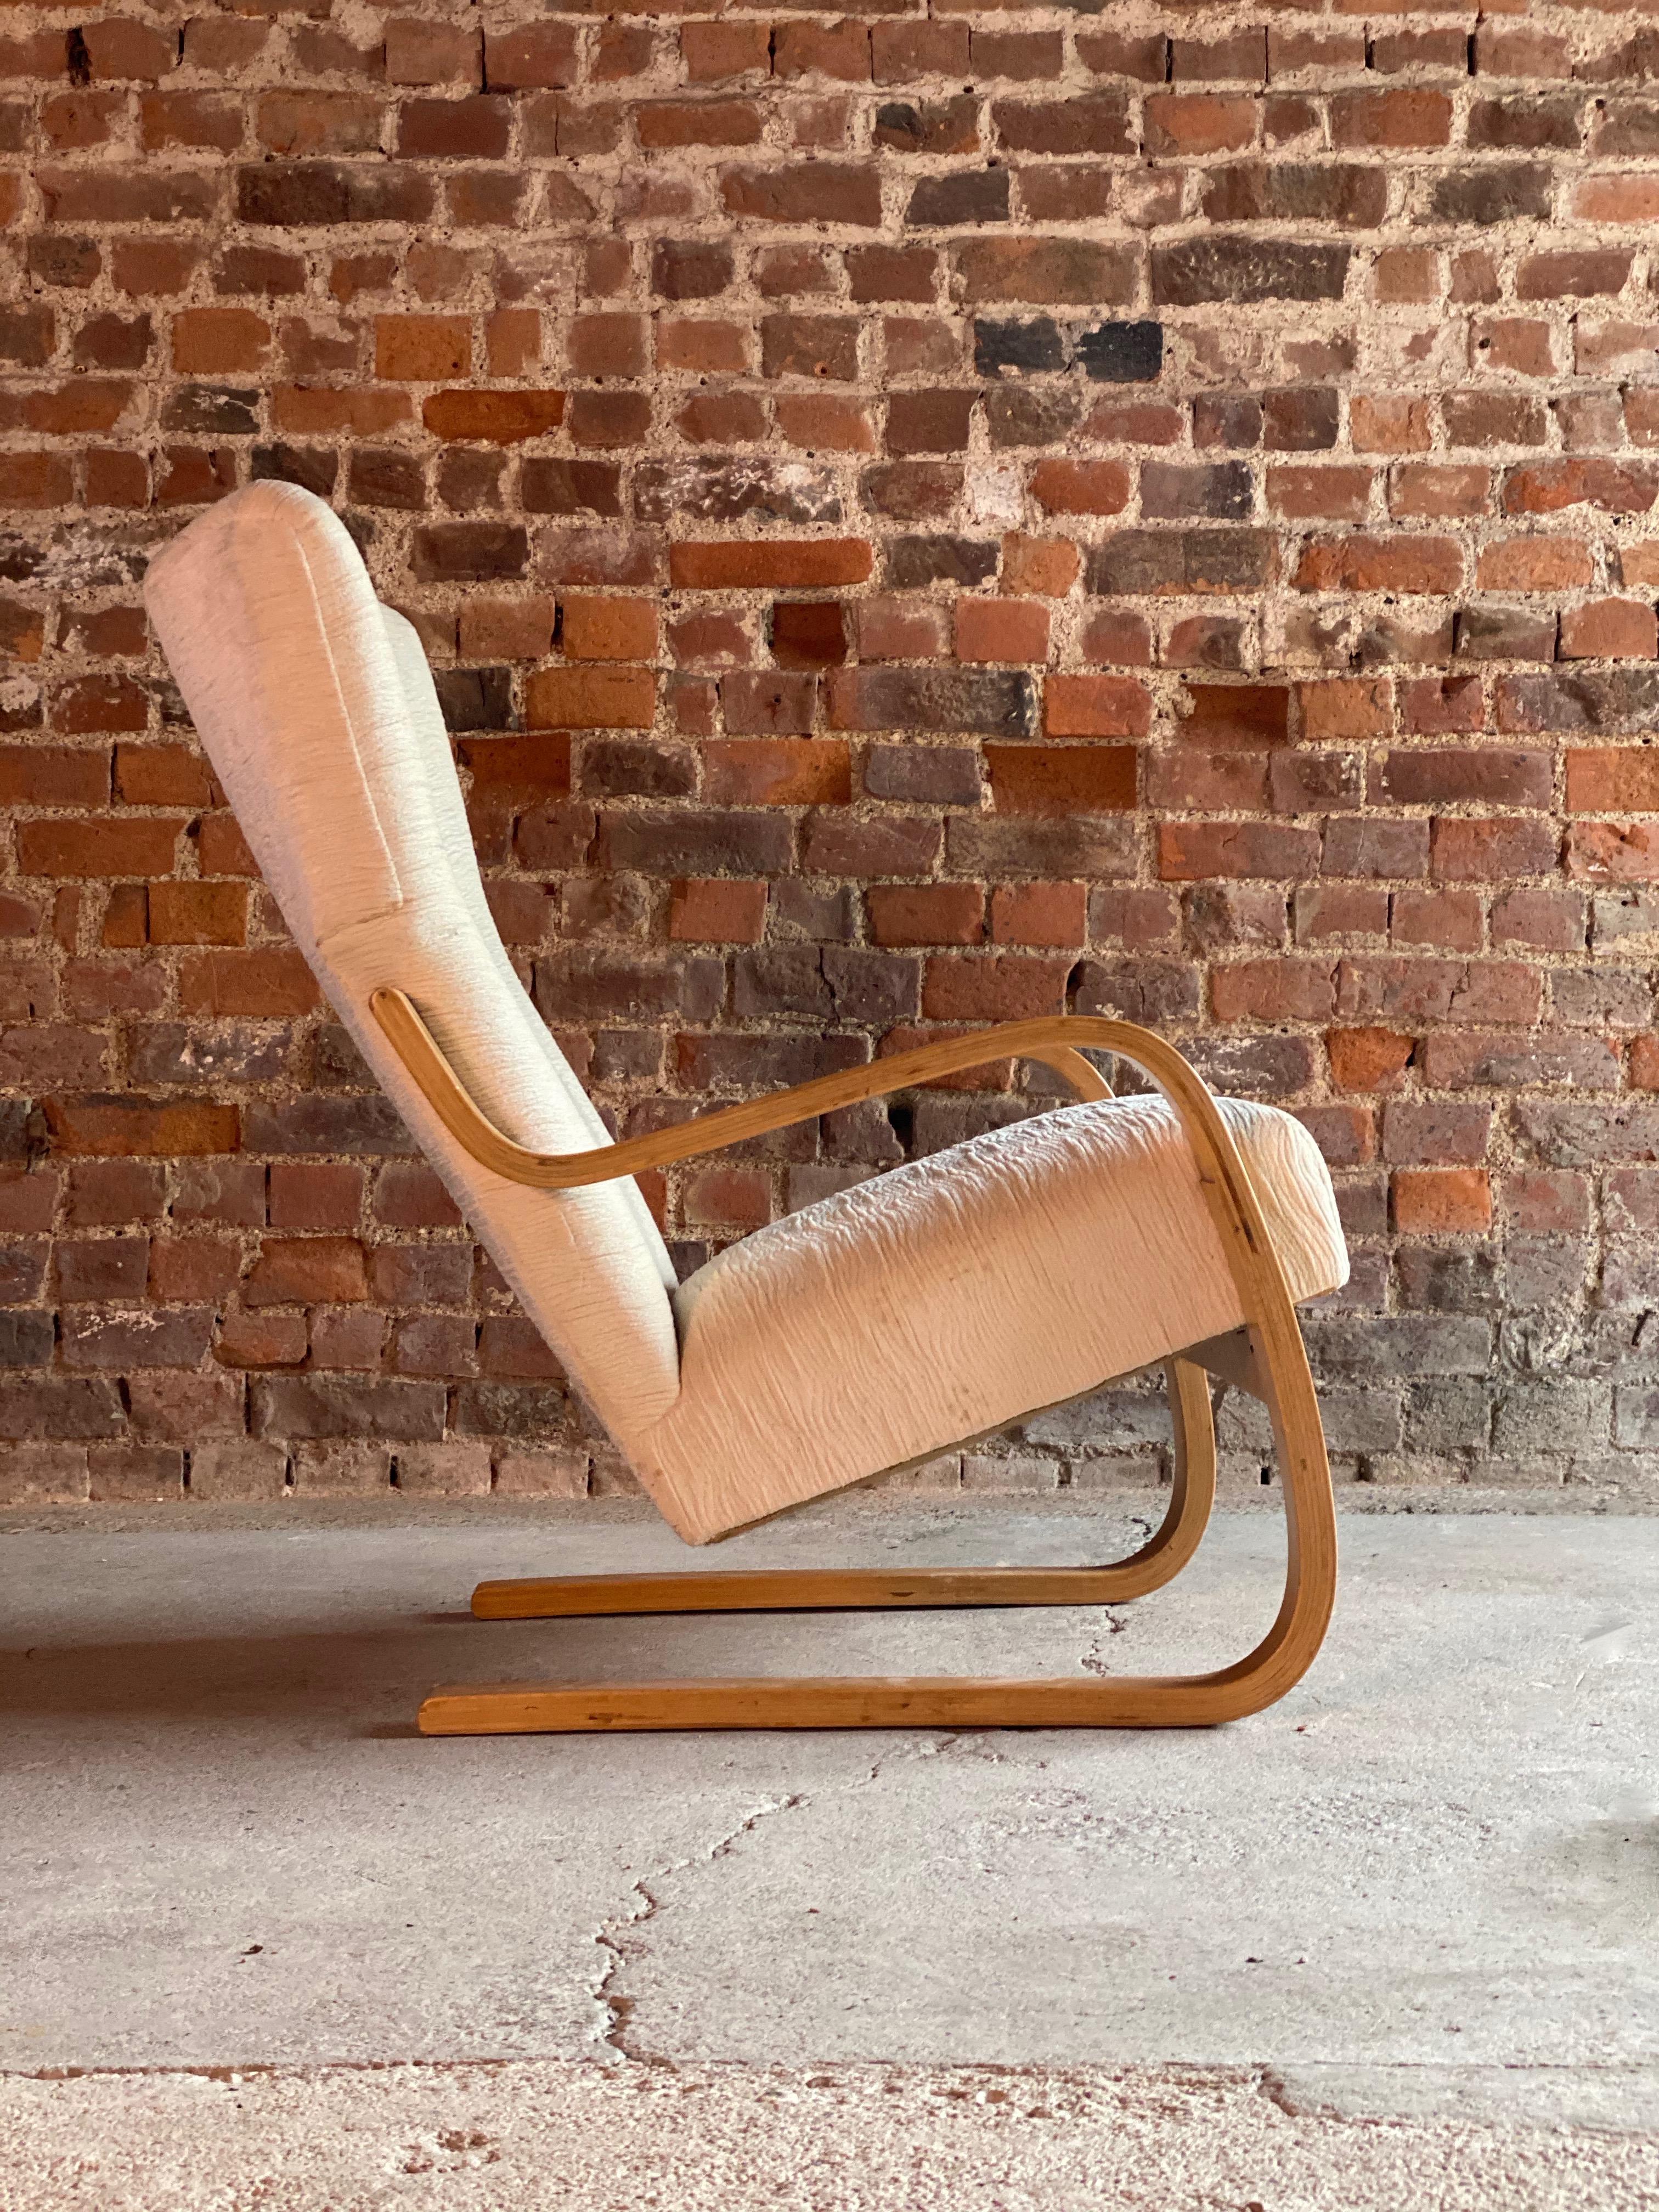 Alvar Aalto model 36 / 401 cantilever lounge chair by Finmar, Finland, circa 1940

Rare early Alvar Aalto series 36 / 401 cantilever chair by Finmar, circa 1940, the cantilevered birch ’S' shaped frame finished in cream upholstery, early original